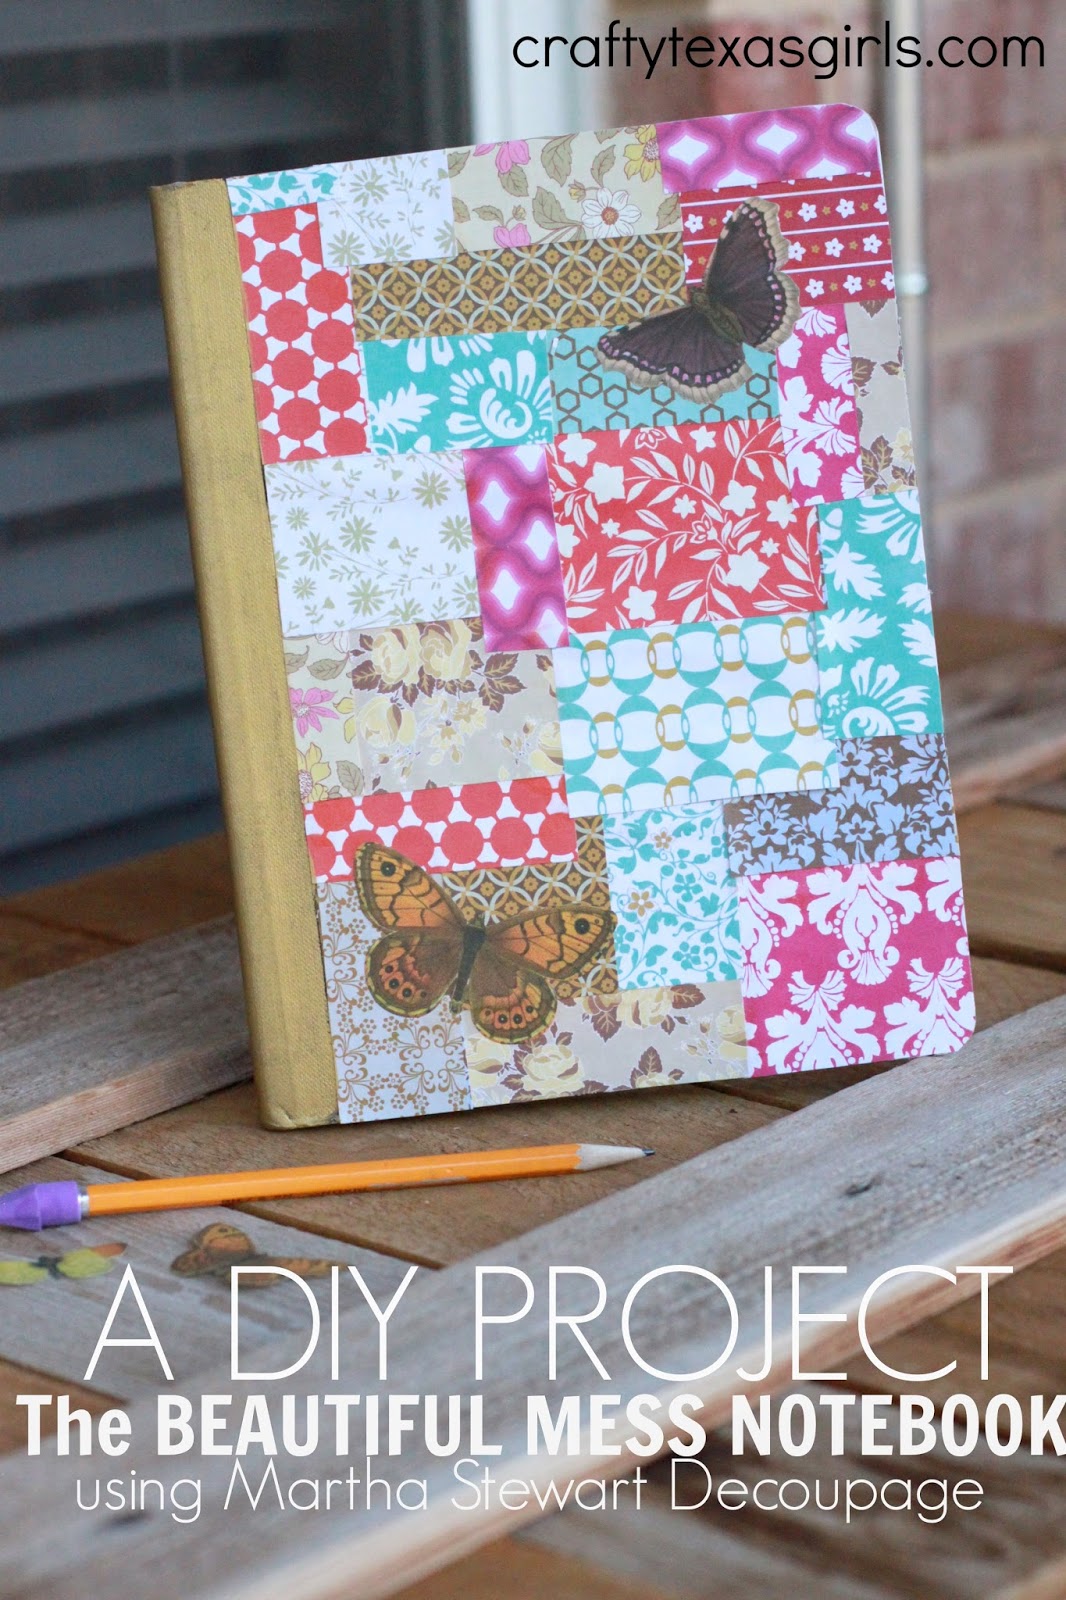 What is Mod Podge? - A Beautiful Mess